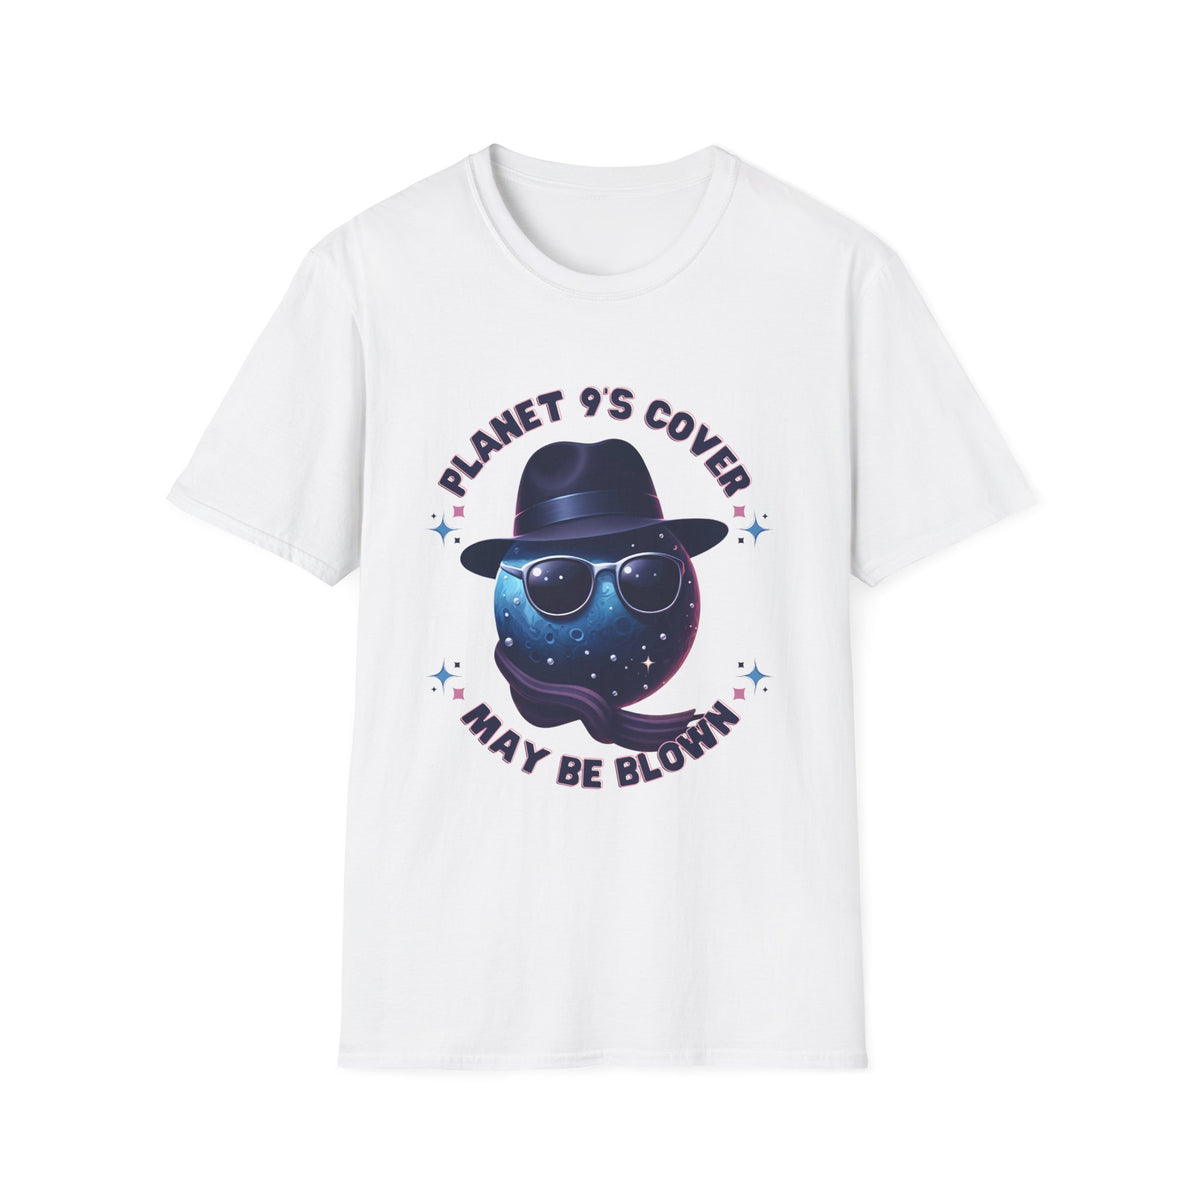 Funny Planet 9 Solar System Shirt | Science Shirt | Astronomy Gift | Unisex Soft Style T-Shirt